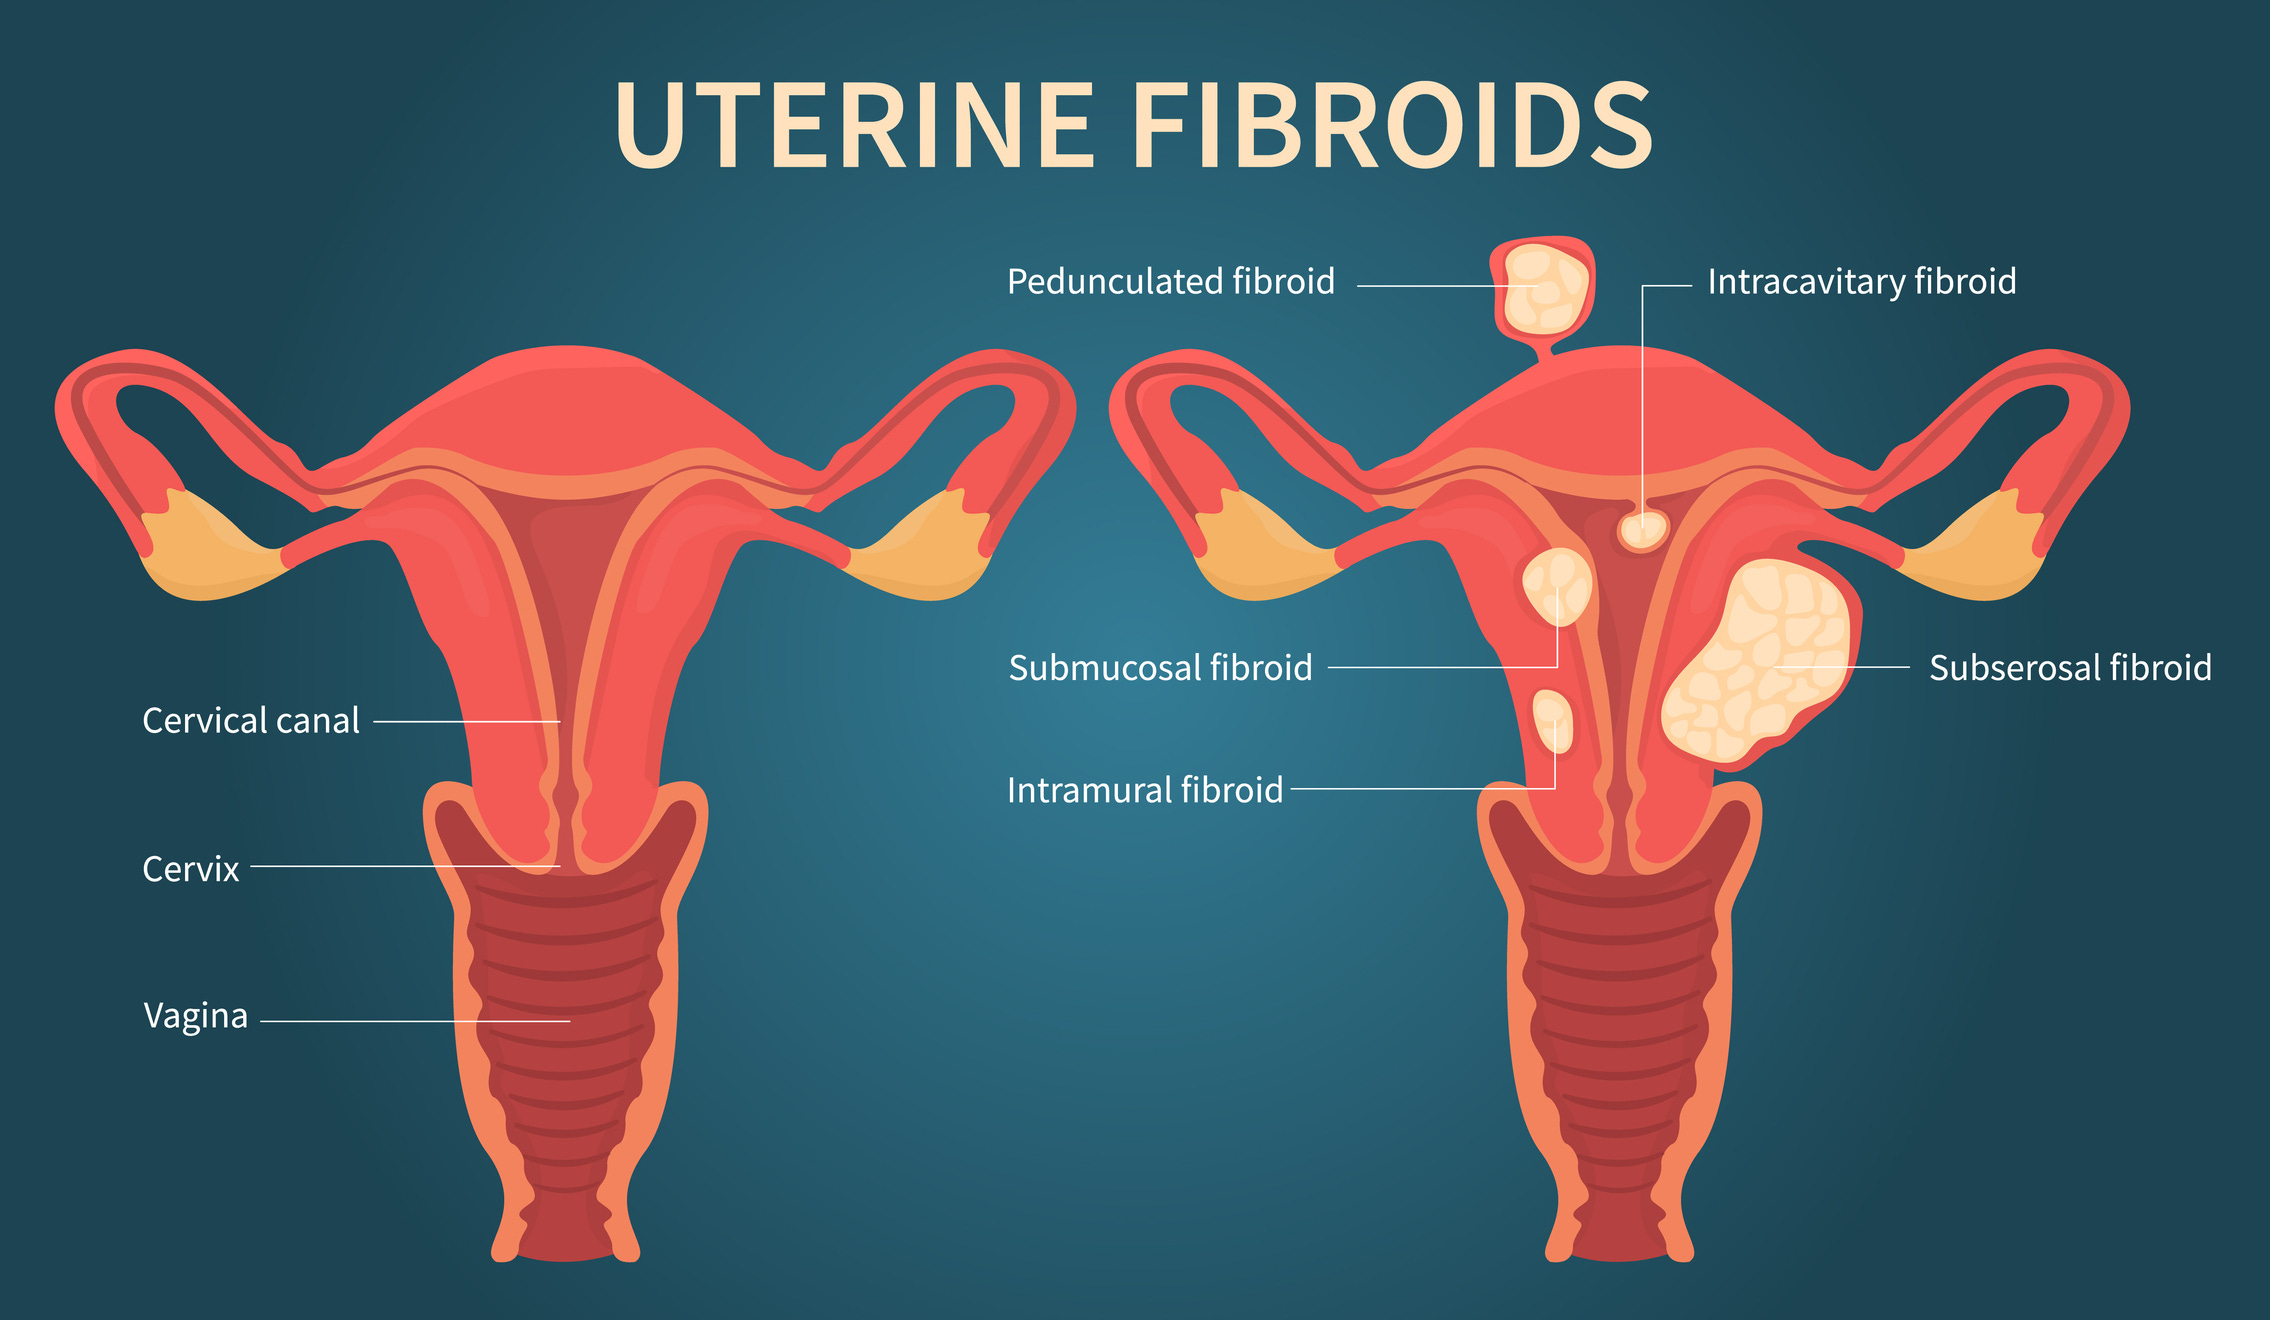 Are clots like this always associated with fibroids and/or